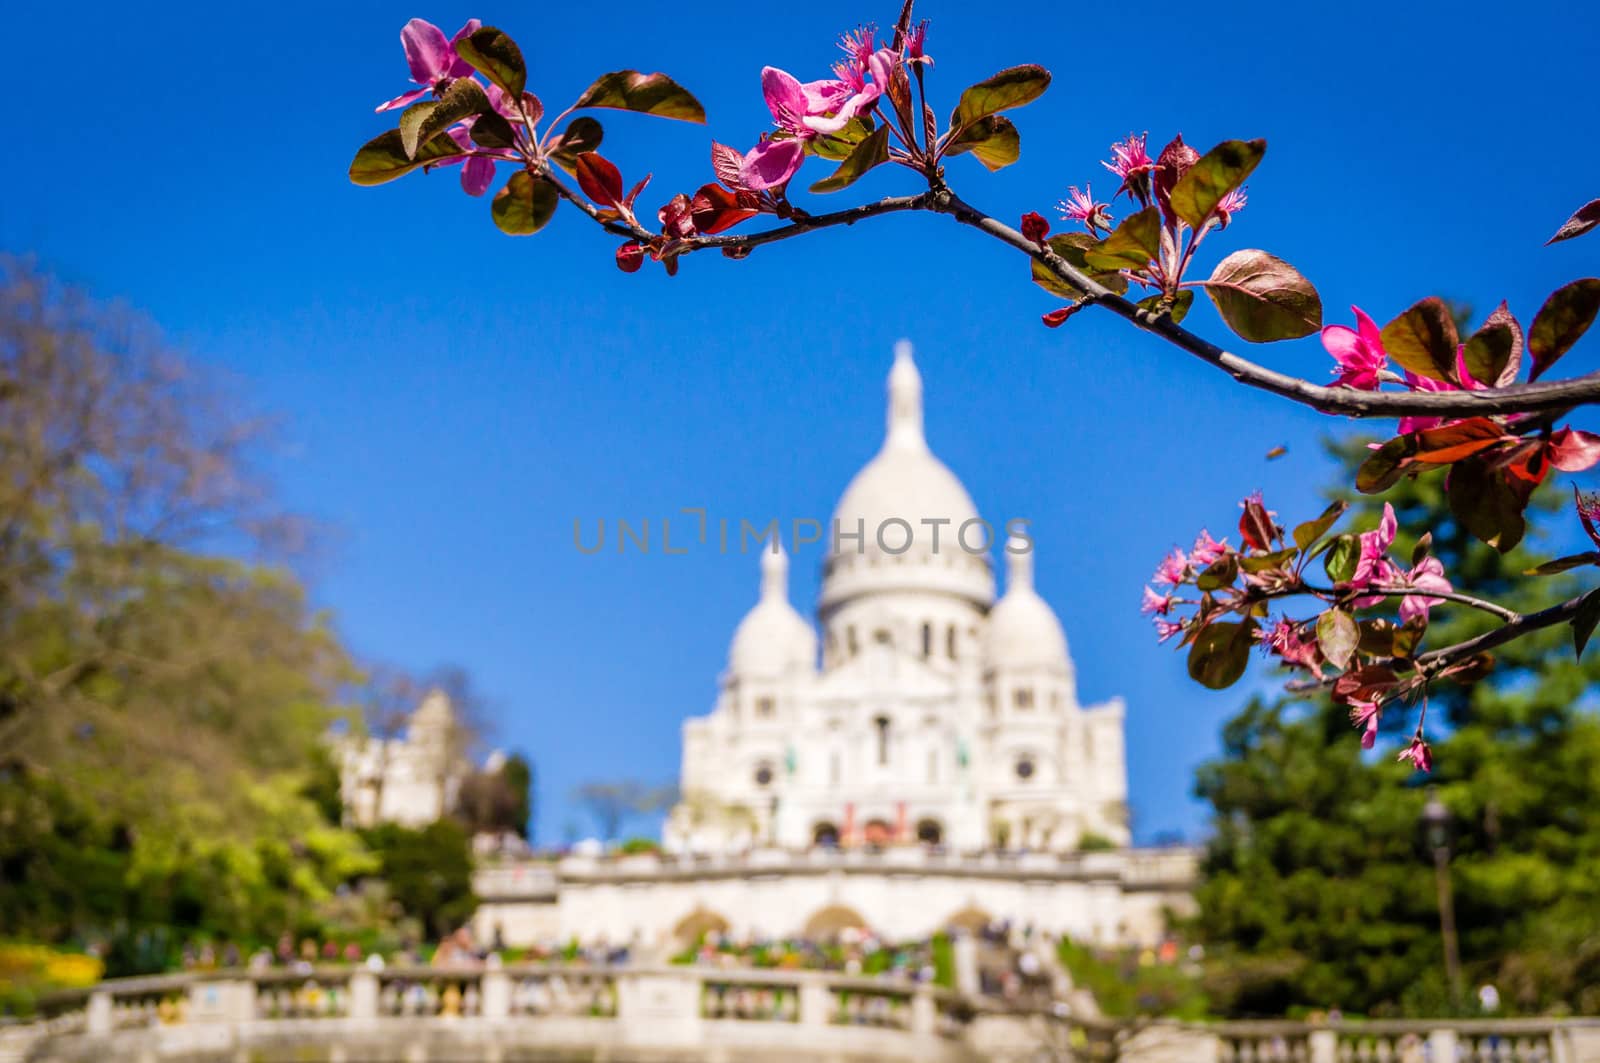 Sacre coeur and pink flowers in Montmartre by bignoub